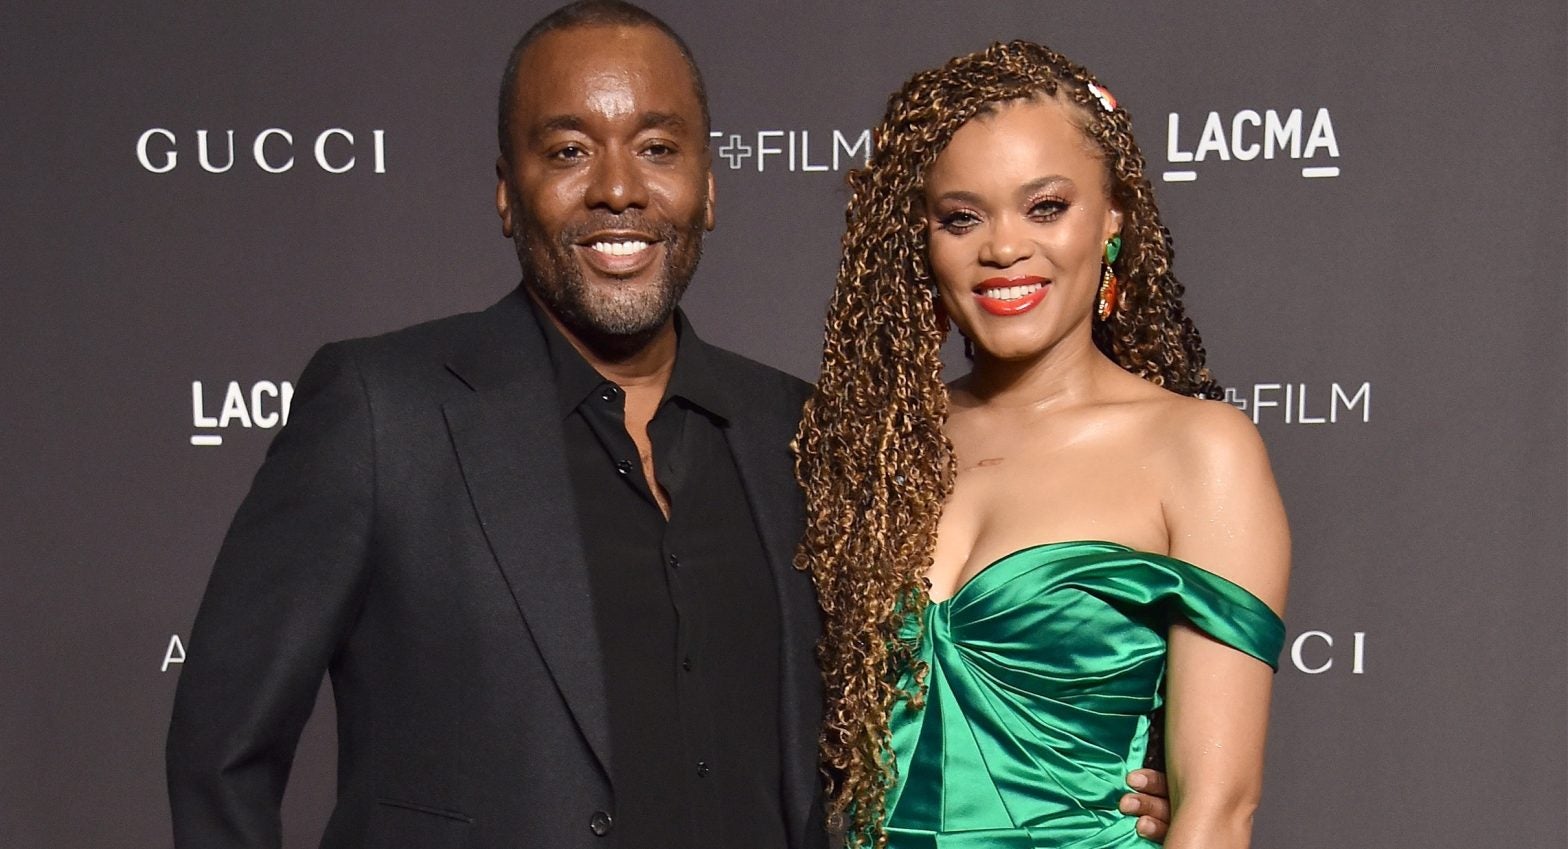 WATCH: Lee Daniels Talks Andra Day's Oscar Nomination, The Future Of 'Star' And More